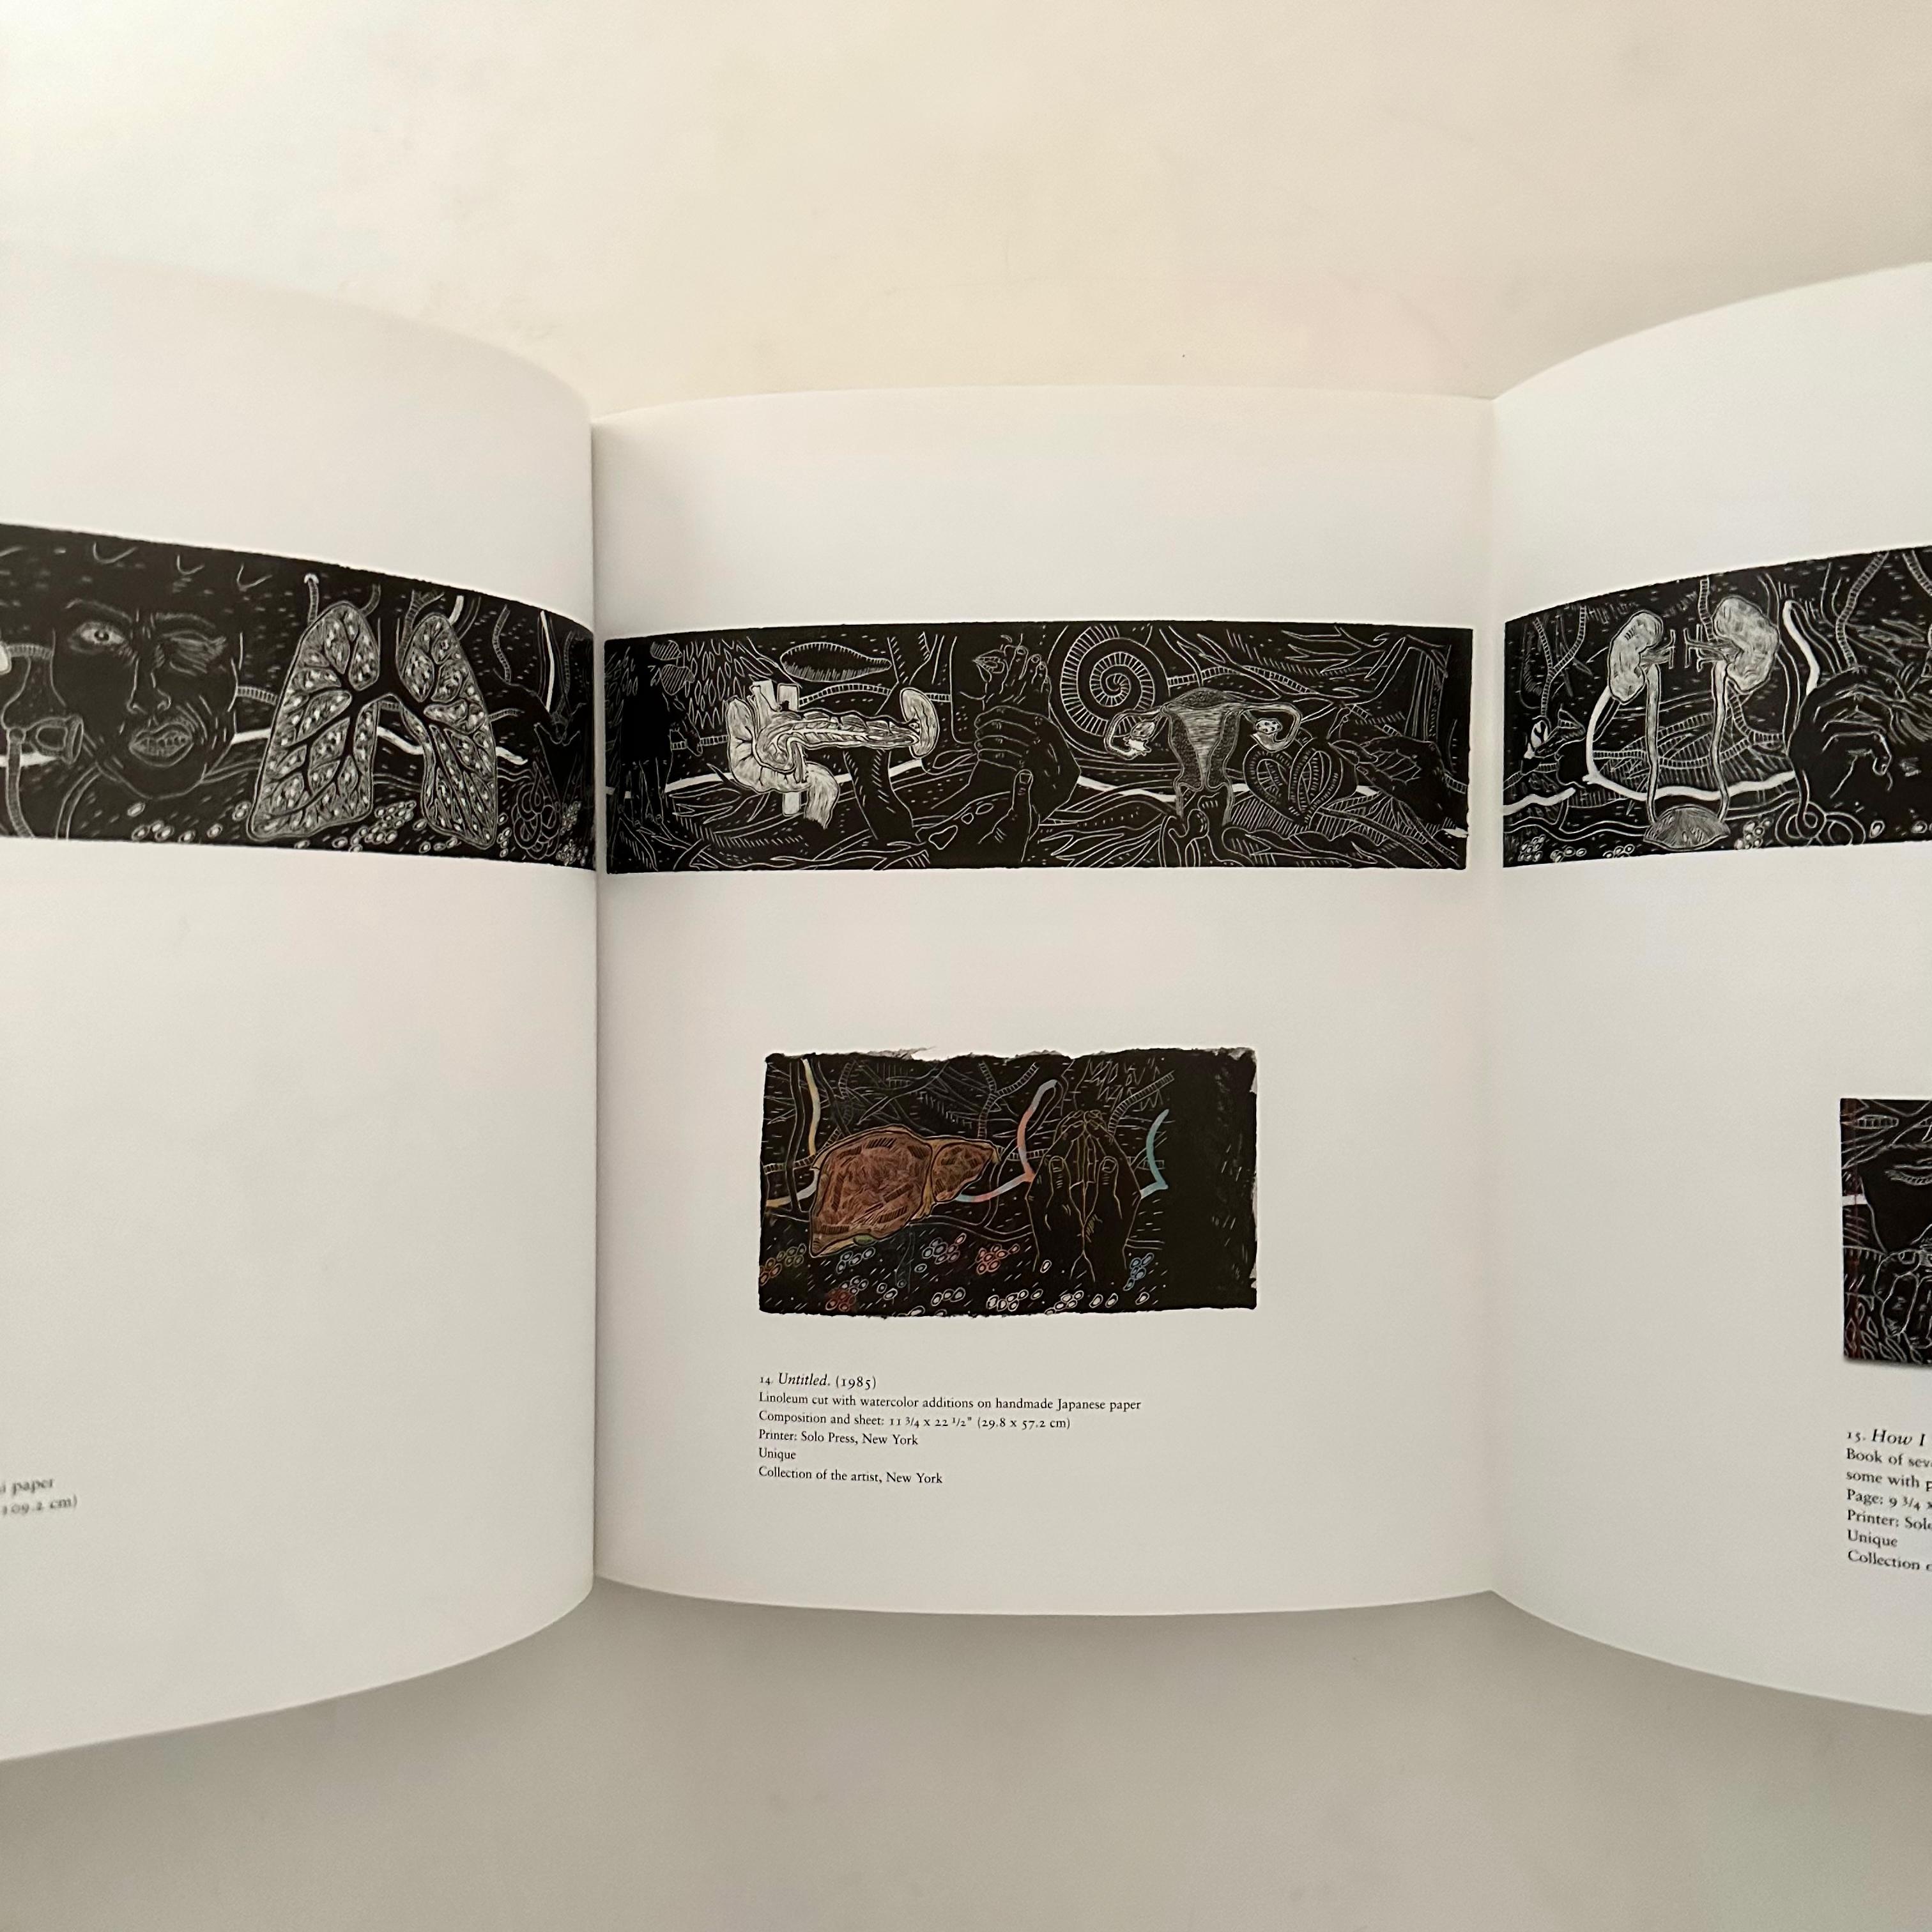 Published by the Museum of Modern Art, New York, 2012. Hardback with English text. 

Prints, Books, and Things is the most complete survey yet of Smith's printed art. 

Fascinated by craft and is constantly exploring and experimenting with her